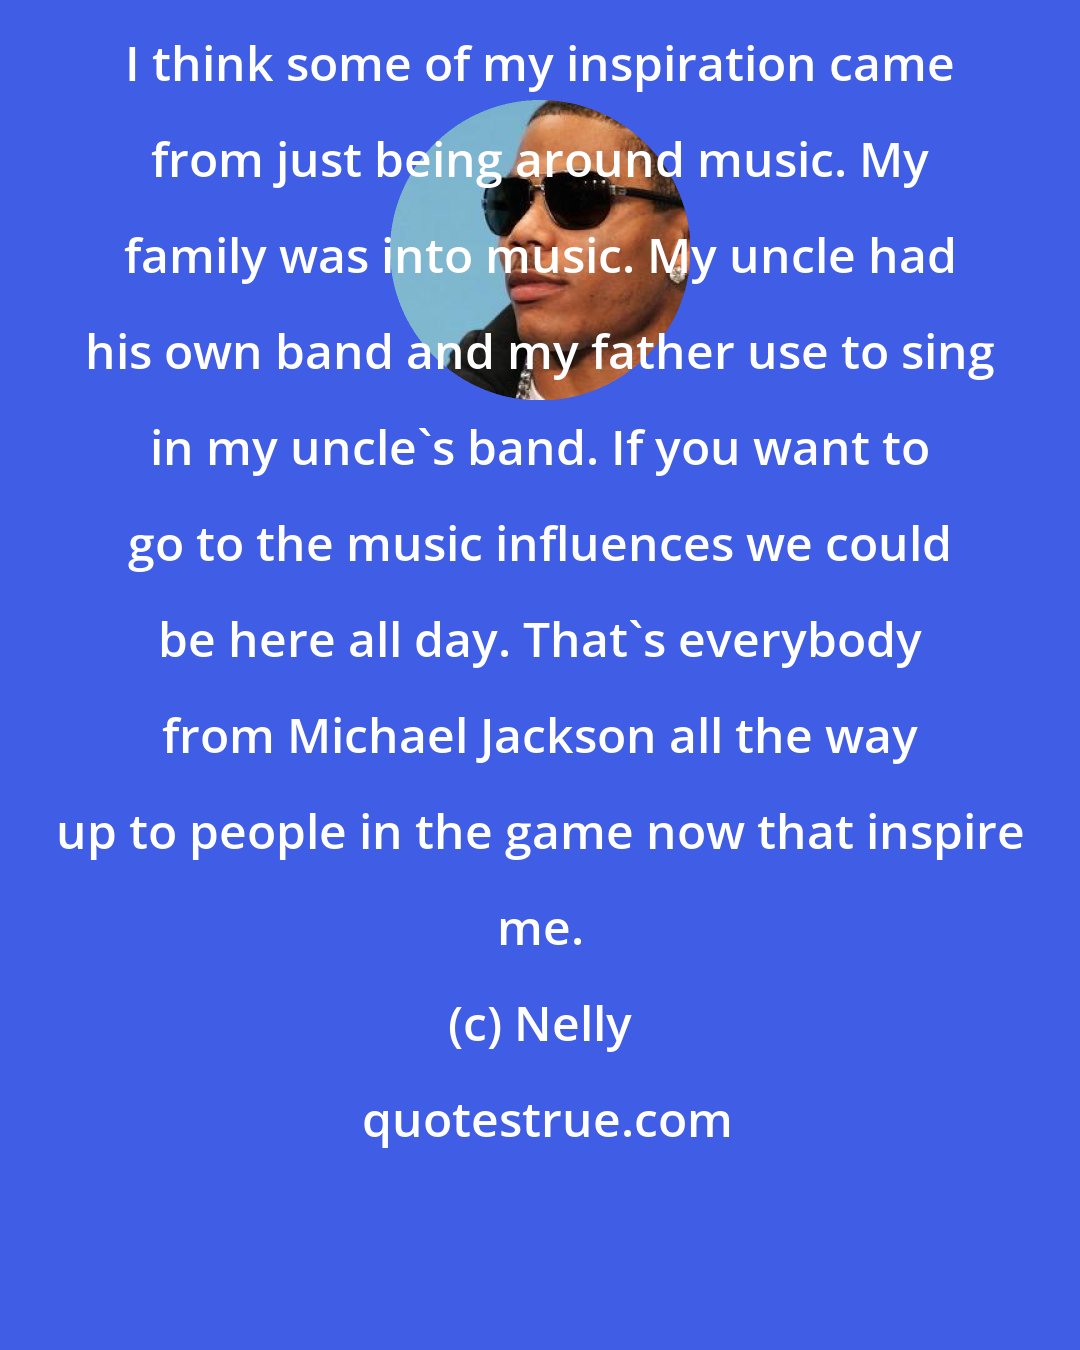 Nelly: I think some of my inspiration came from just being around music. My family was into music. My uncle had his own band and my father use to sing in my uncle's band. If you want to go to the music influences we could be here all day. That's everybody from Michael Jackson all the way up to people in the game now that inspire me.